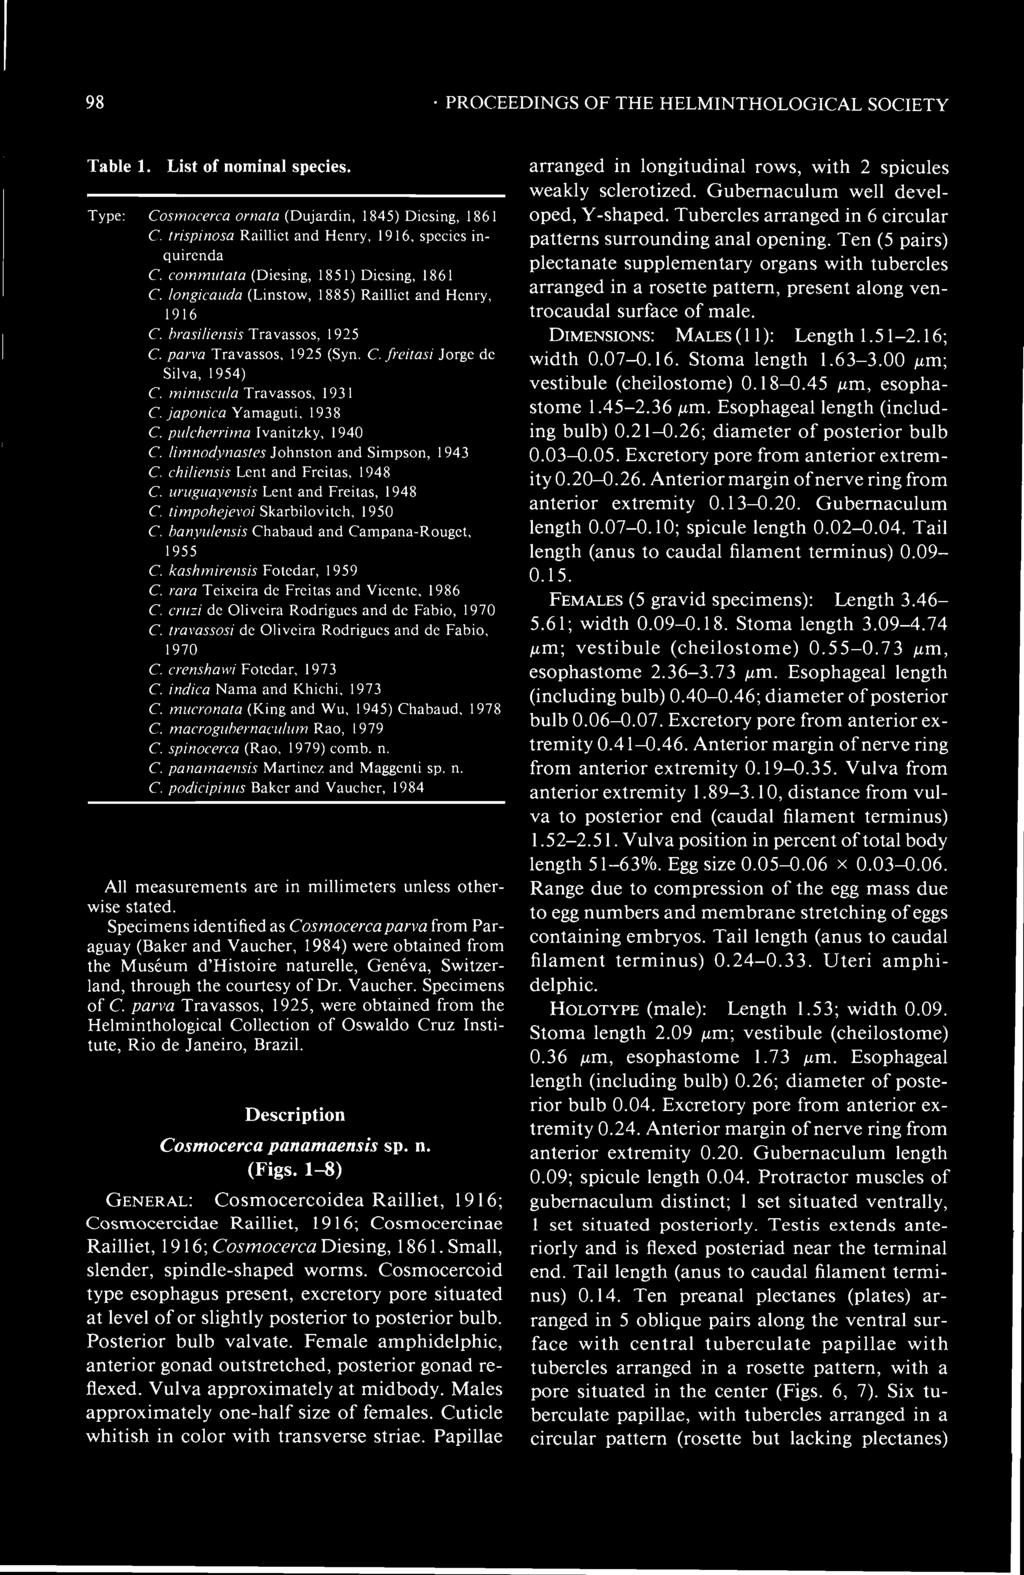 98 PROCEEDINGS OF THE HELMINTHOLOGICAL SOCIETY Table 1. List of nominal species. Type: Cosmocerca ornata (Dujardin, 1845) Dicsing, 1861 C. trispinosa Railliet and Henry, 1916, species inquirenda C.